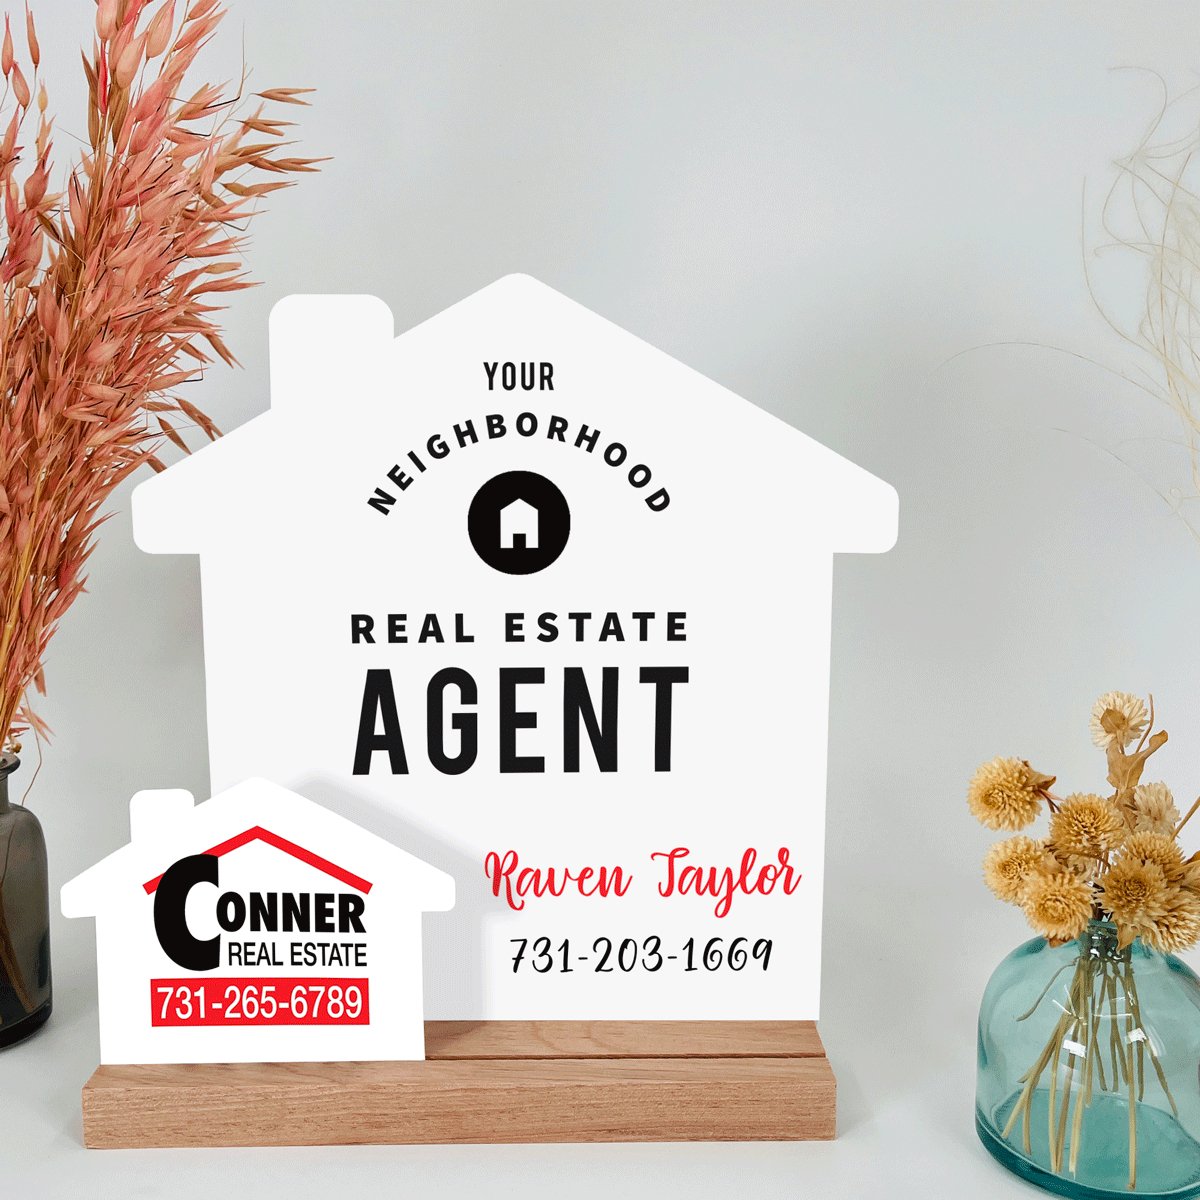 Personalized Neighborhood Agent Sign Kit - House-Shaped - All Things Real Estate